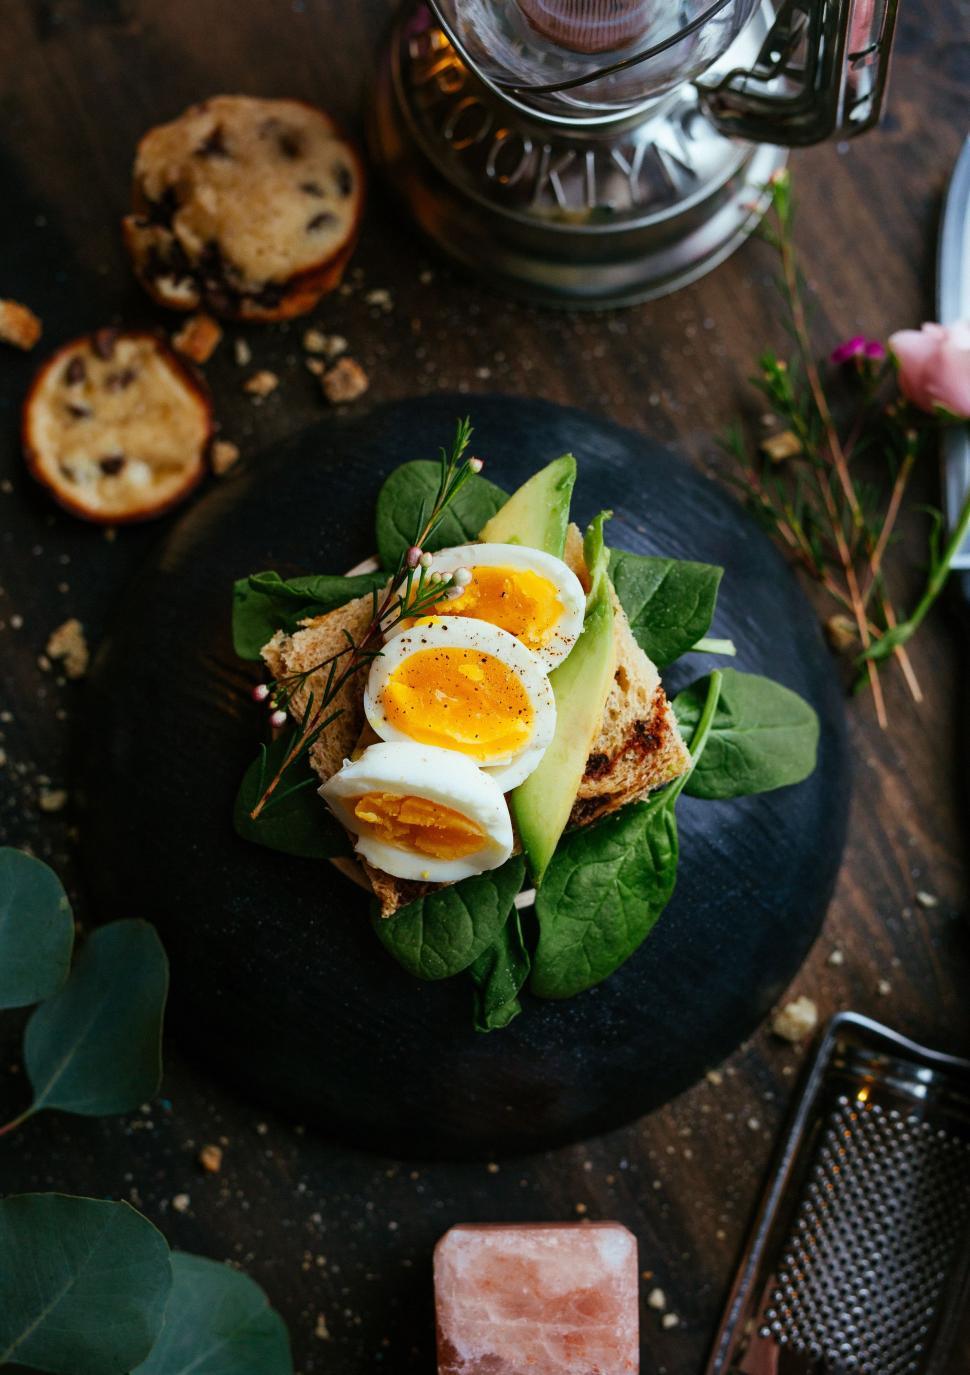 Free Image of Plate With Egg and Avocado 